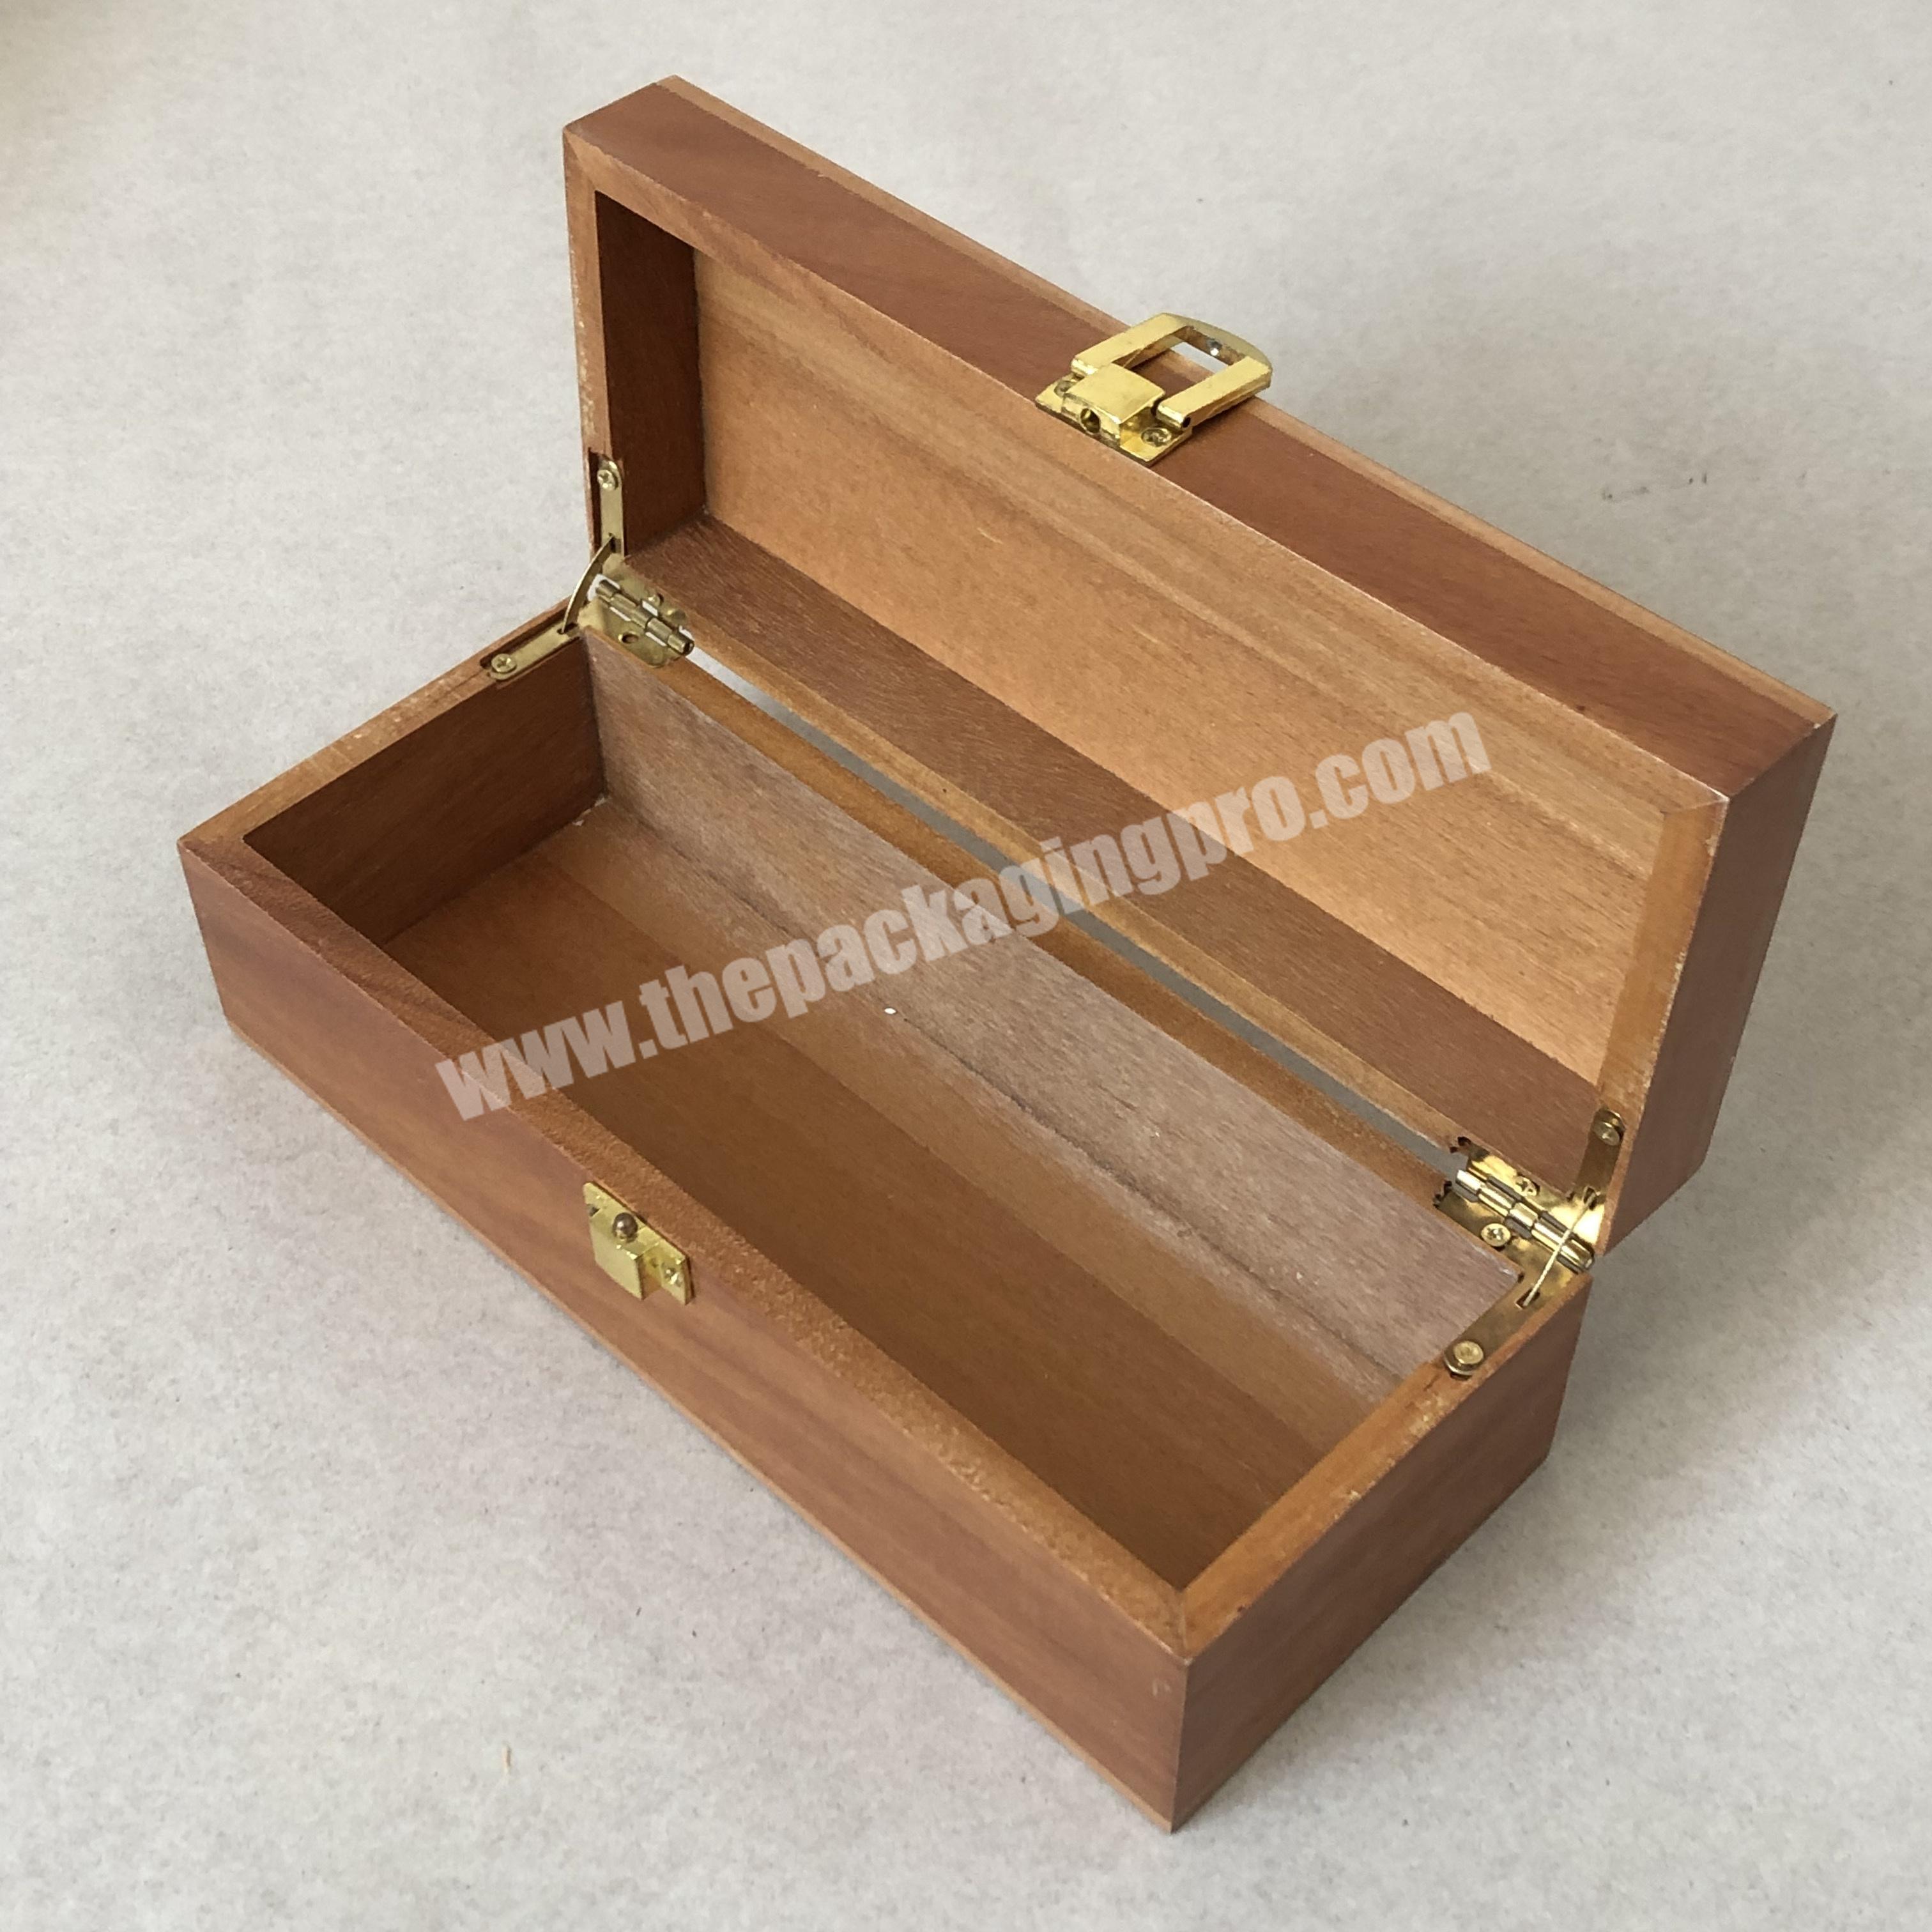 Platane wood gift box with metal hinge for rose flower packing